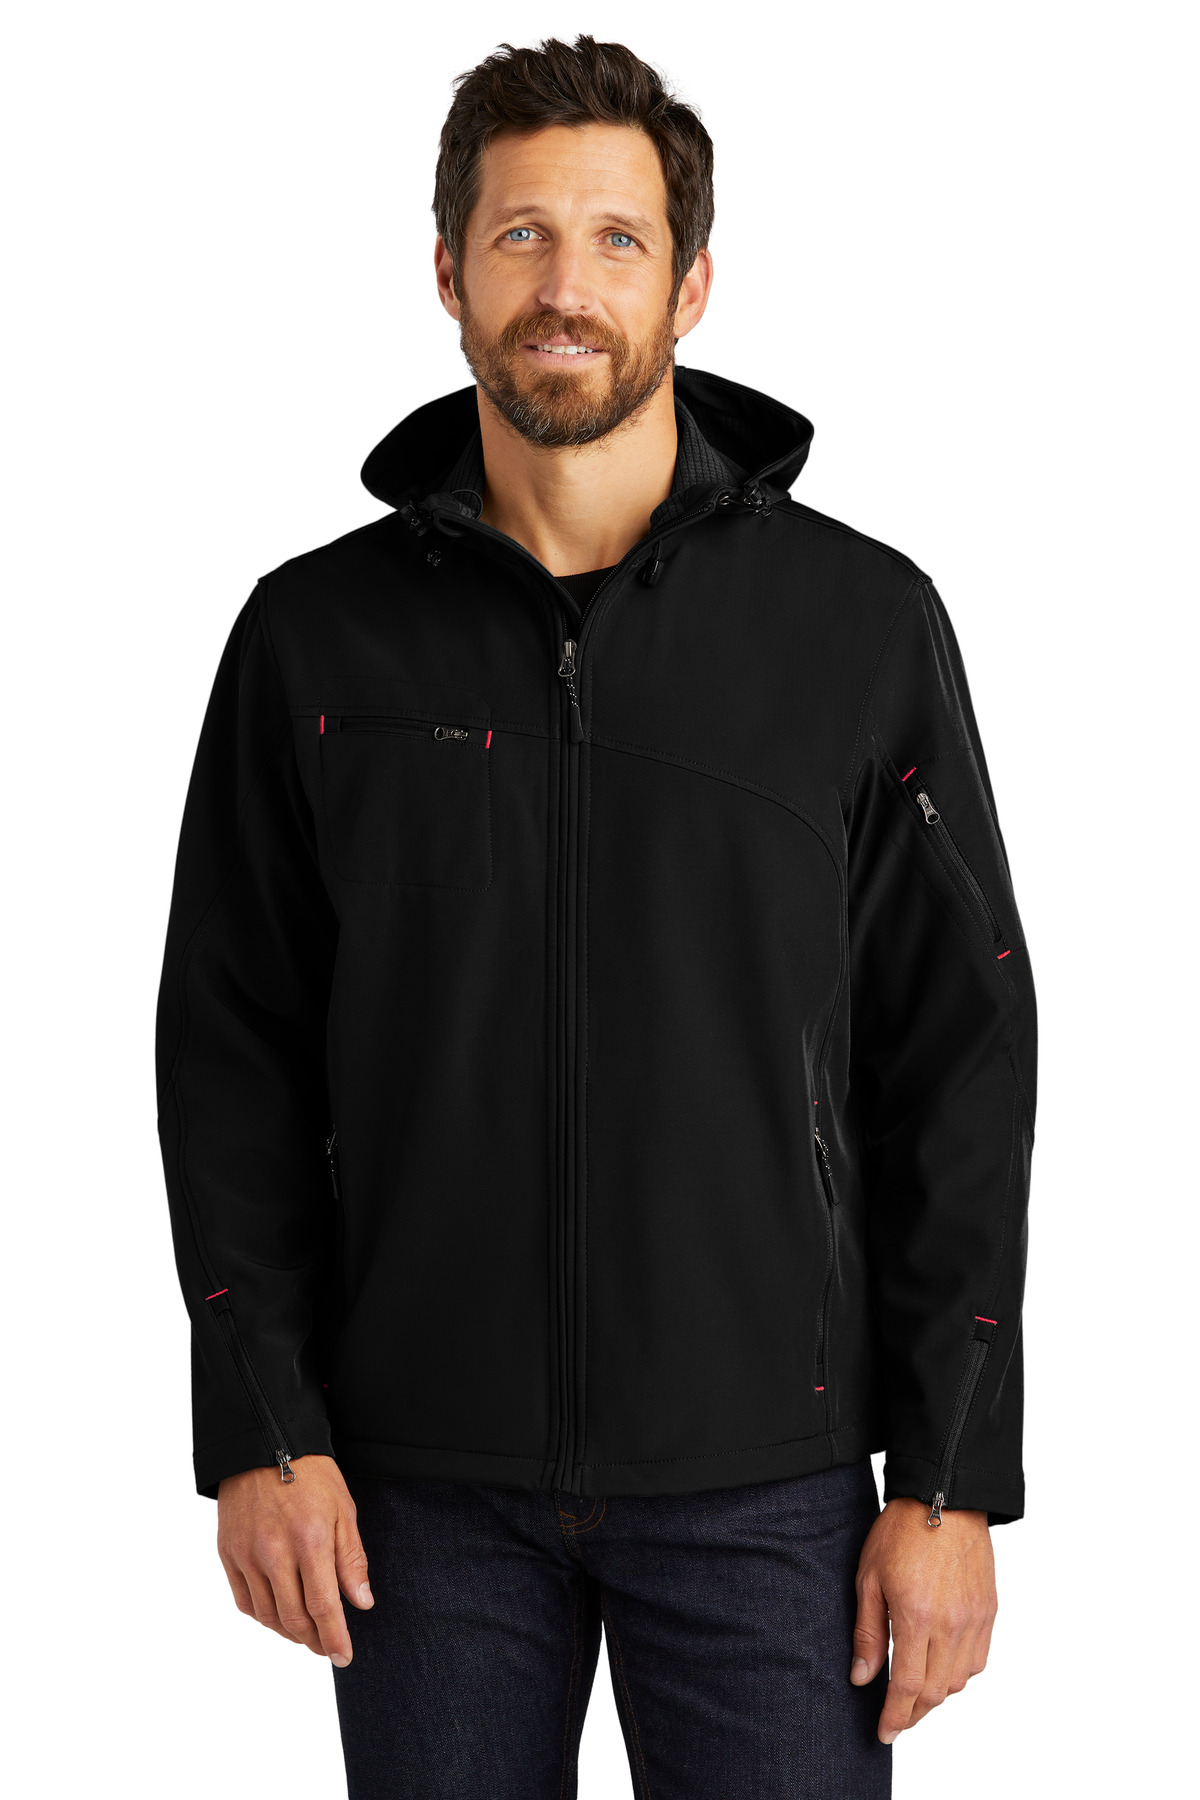 Port Authority Hospitality Outerwear ® Textured Hooded Soft Shell Jacket.-Port Authority